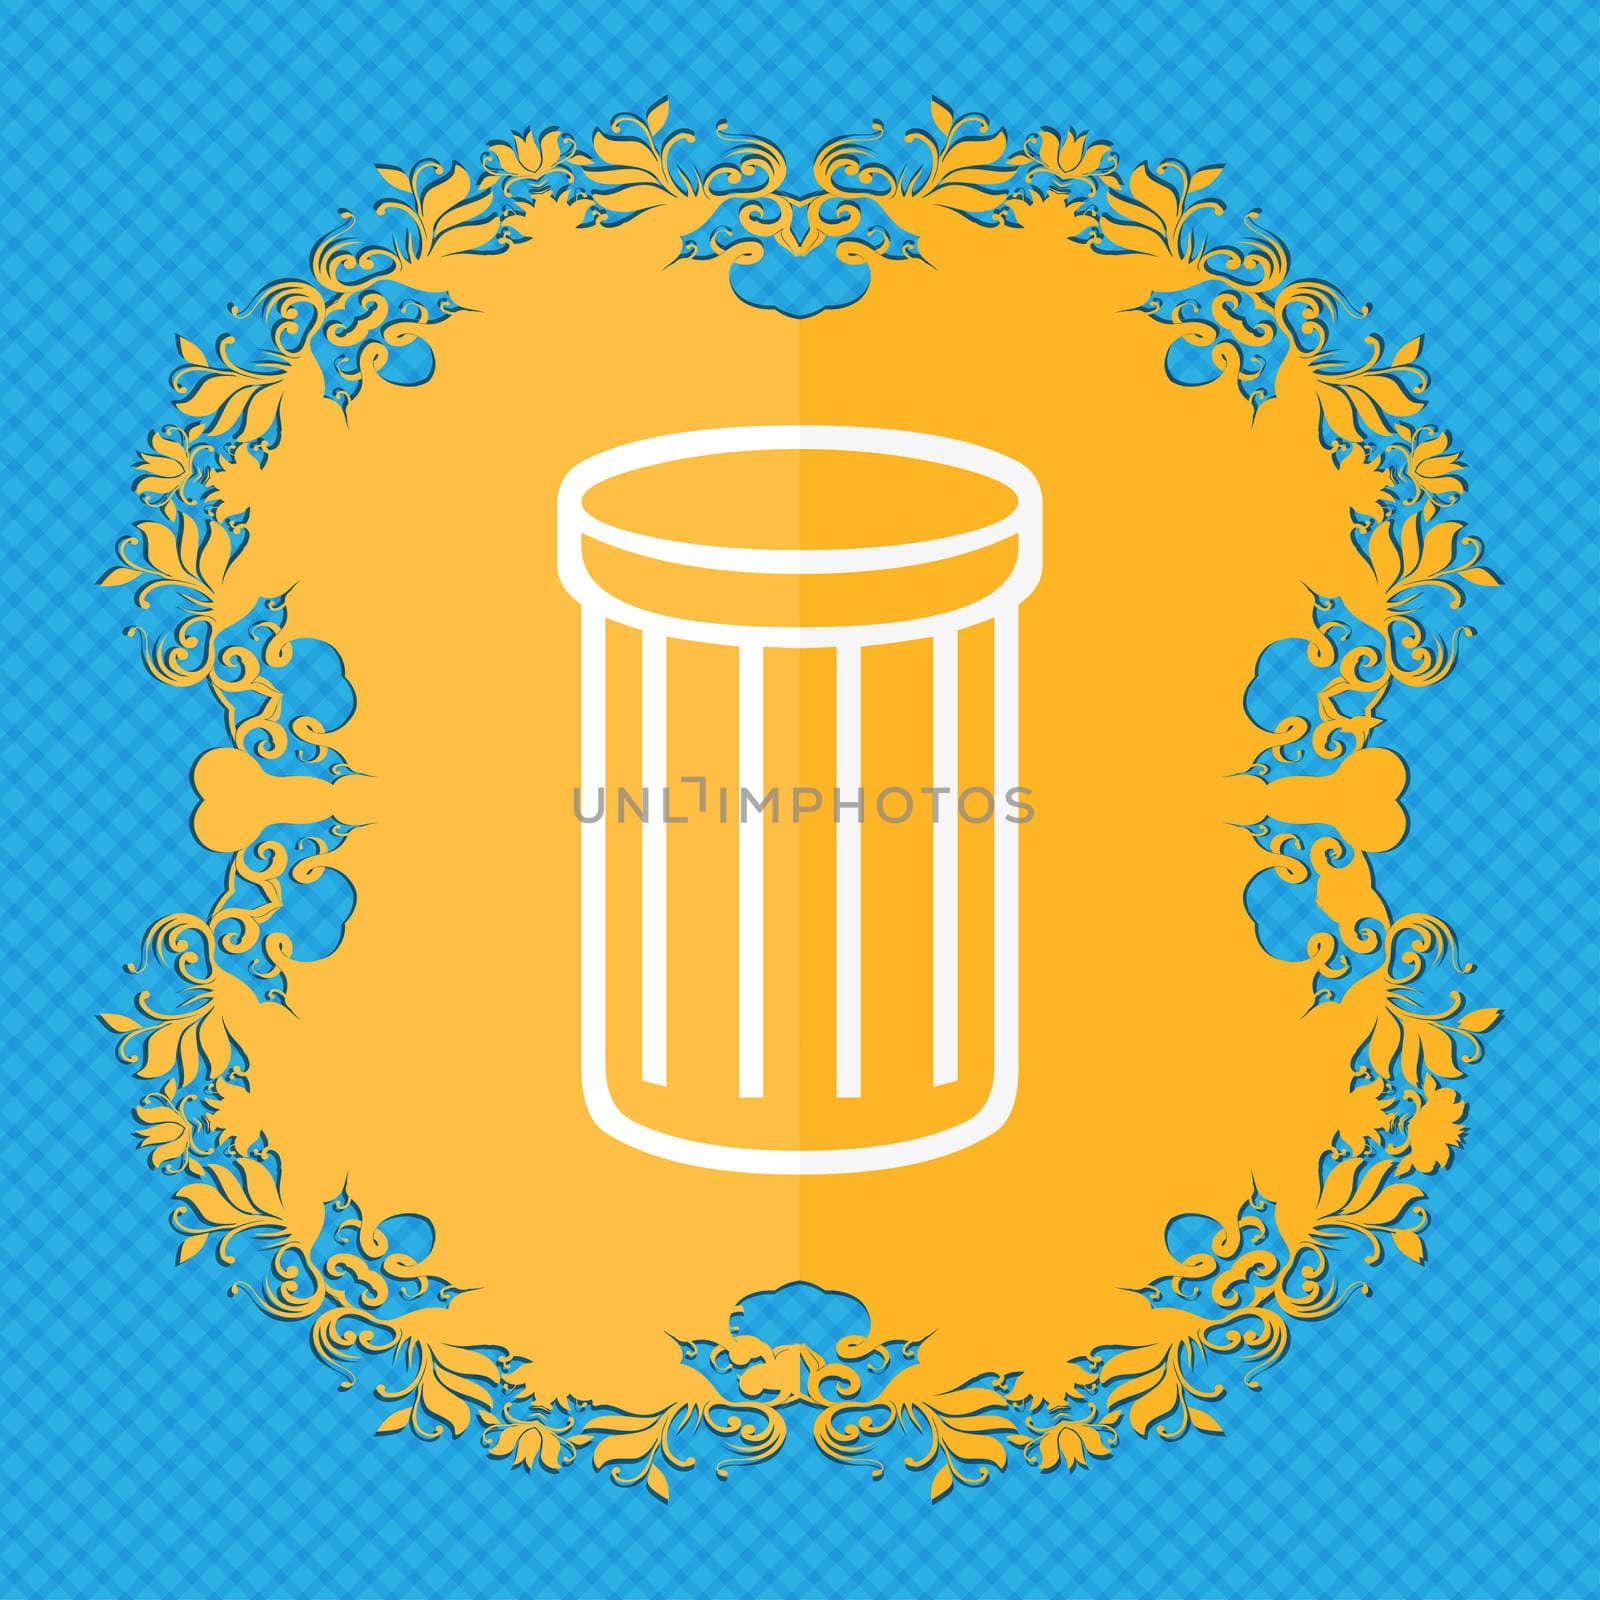 Recycle bin sign icon. Symbol. Floral flat design on a blue abstract background with place for your text. illustration